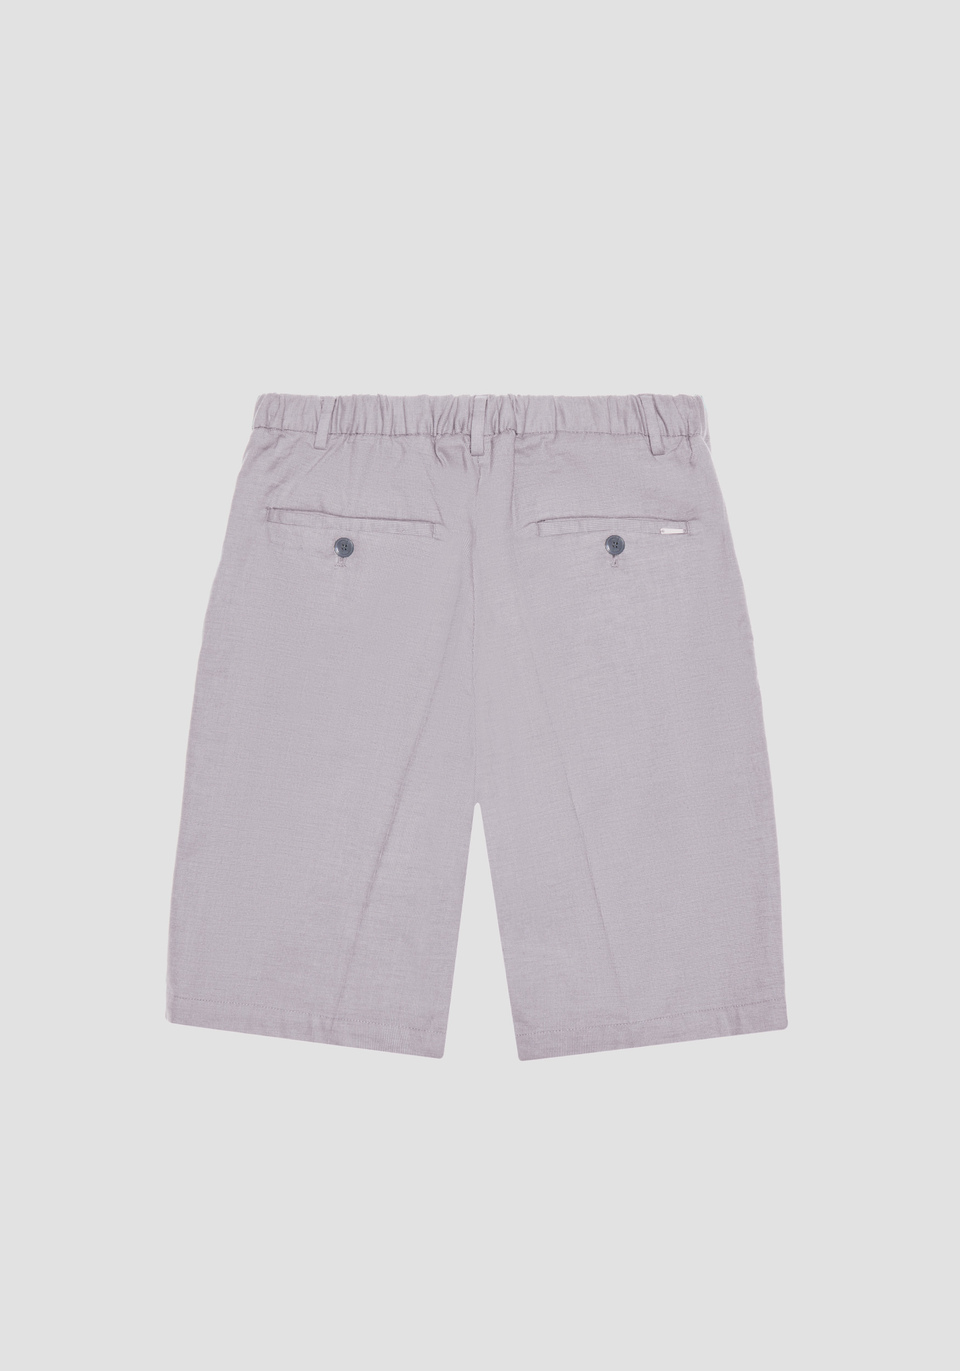 "GUSTAF" CARROT-FIT SHORTS IN YARN-DYED STRETCH COTTON - Antony Morato Online Shop